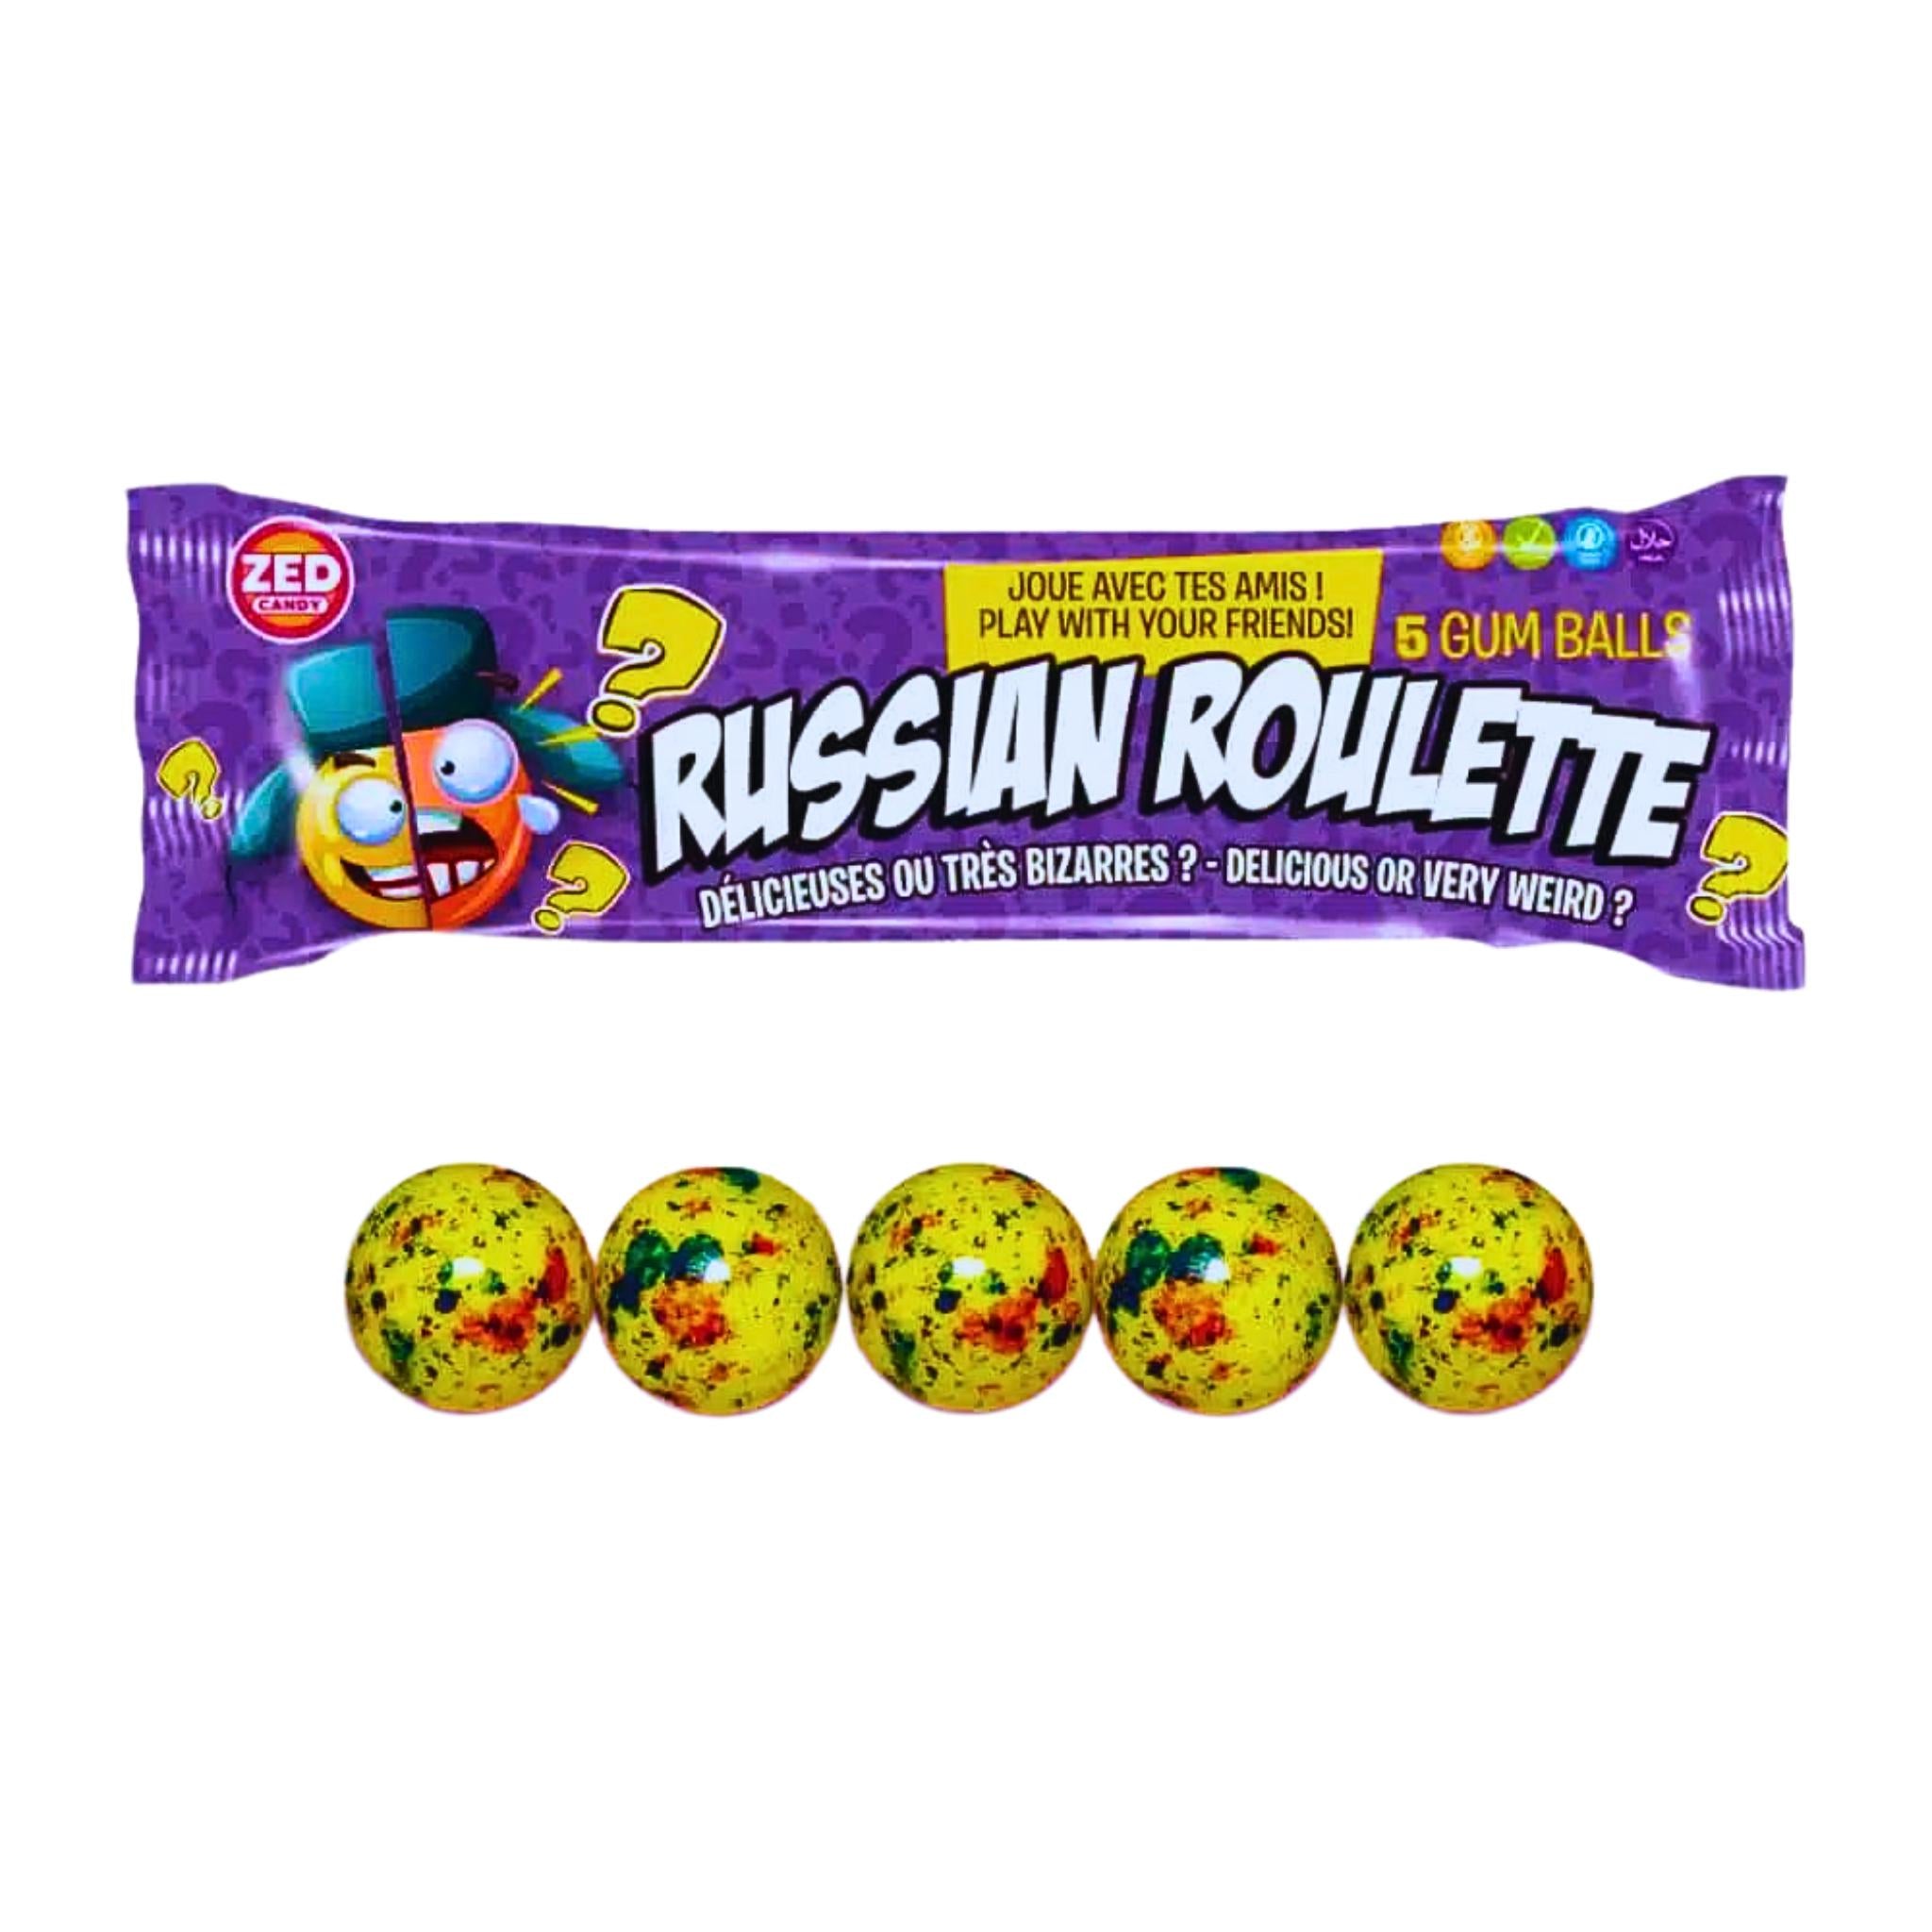 Russian Roulette - 35.5g